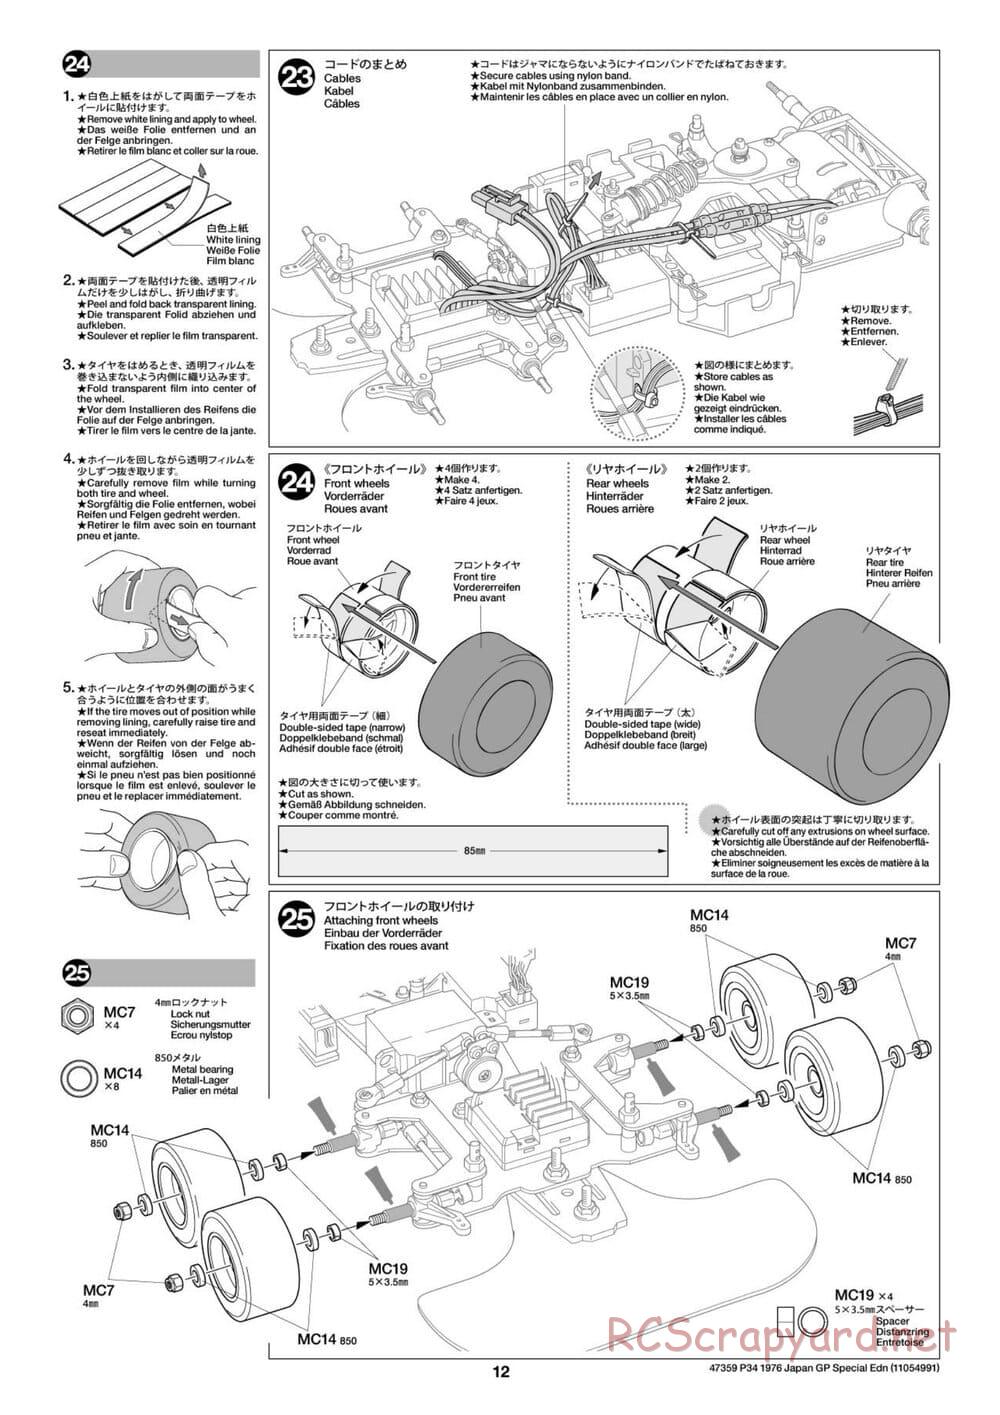 Tamiya - Tyrrell P34 1976 Japan Grand Prix Special - F103-6W Chassis - Manual - Page 12